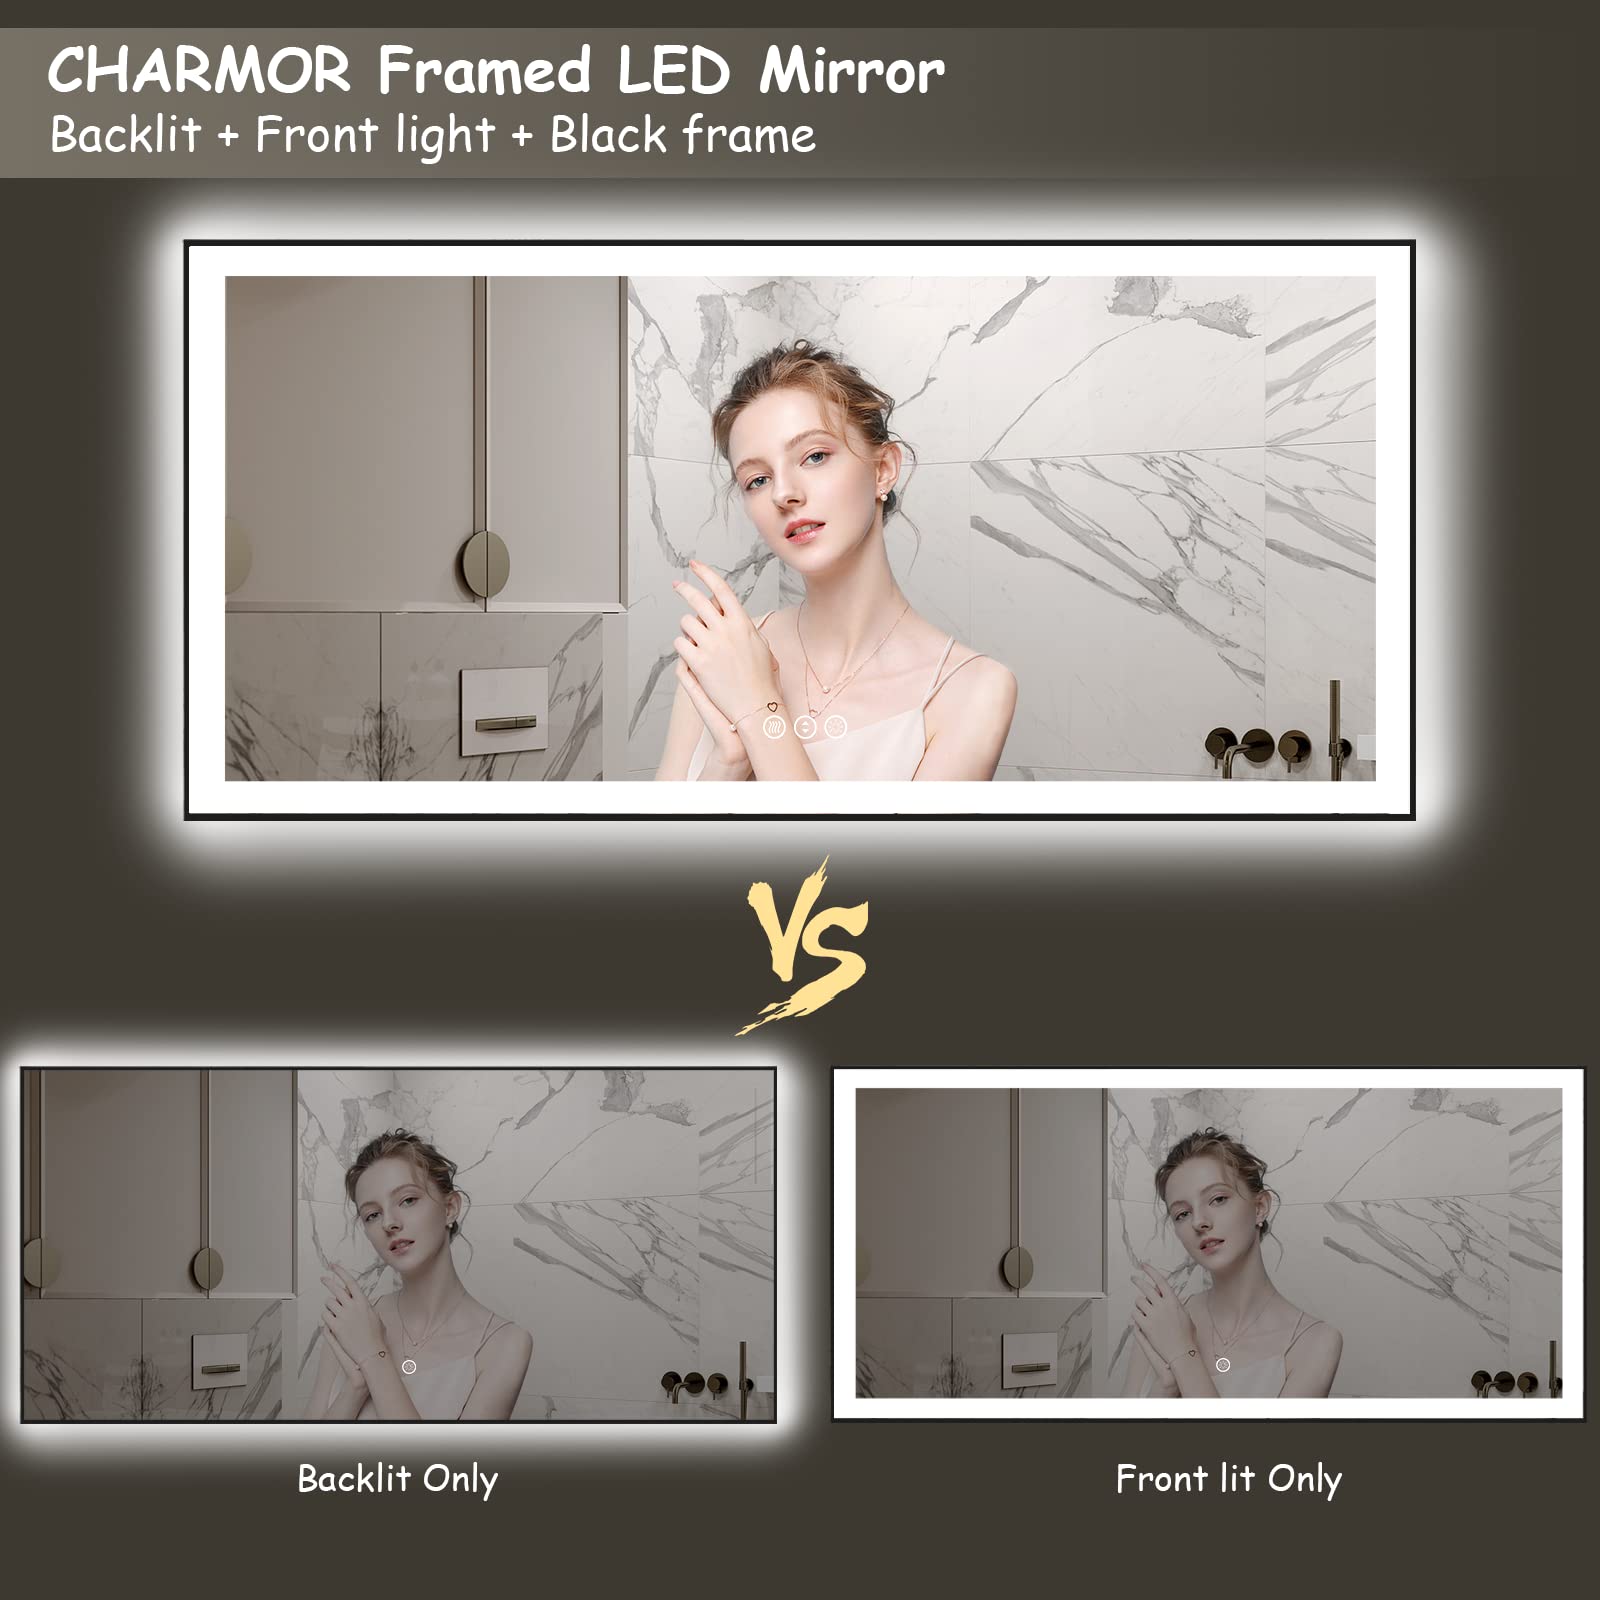 CHARMOR 88X38 LED Bathroom Mirror for Wall, Large Dimmable Lighted Mirror for Bathroom Vanity with Black Frame, Anti-Fog, Shatterproof, Memory, ETL Listed (Backlit and Front Lights)